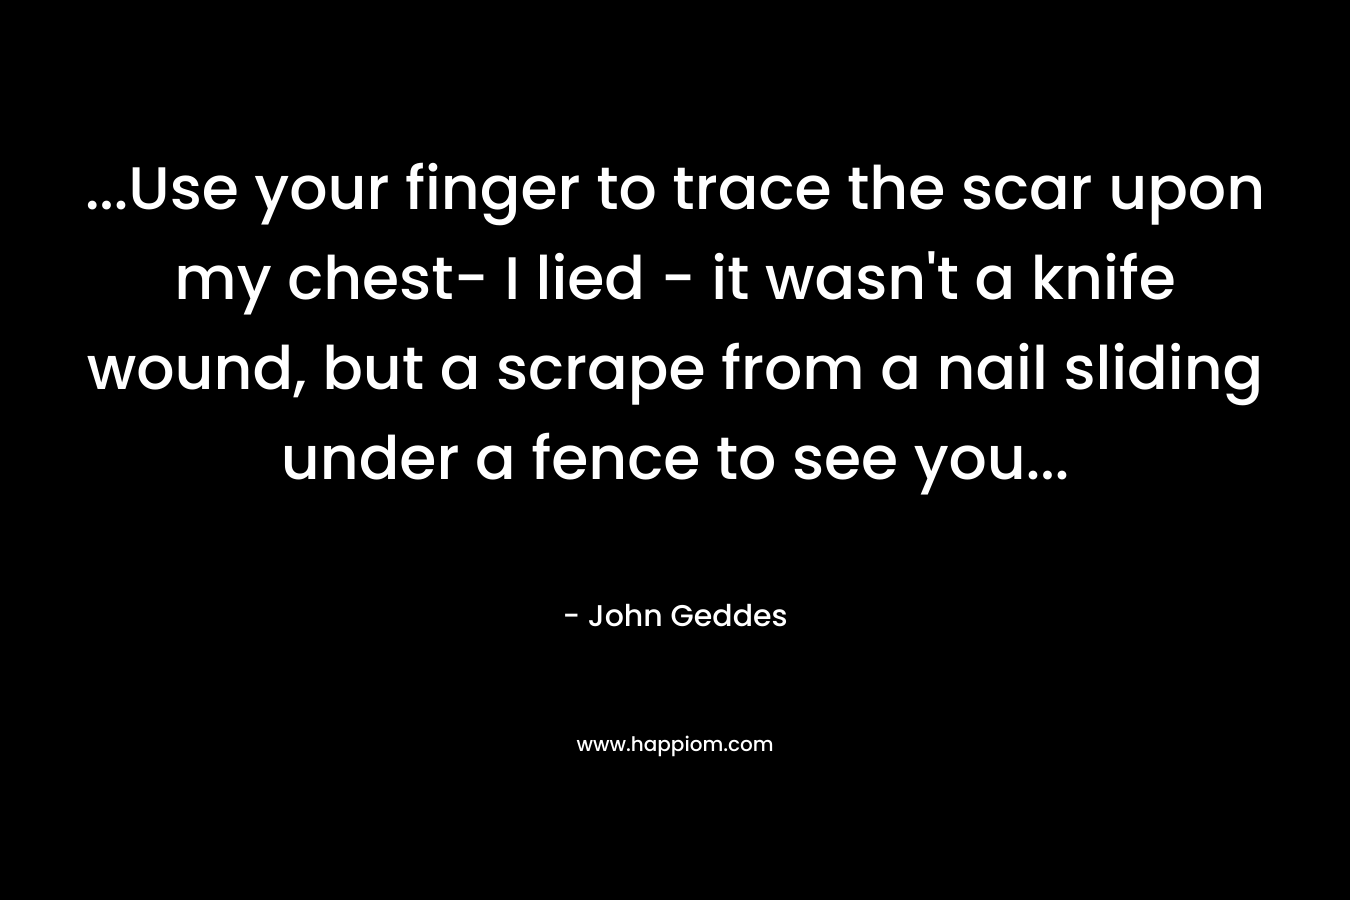 …Use your finger to trace the scar upon my chest- I lied – it wasn’t a knife wound, but a scrape from a nail sliding under a fence to see you… – John Geddes